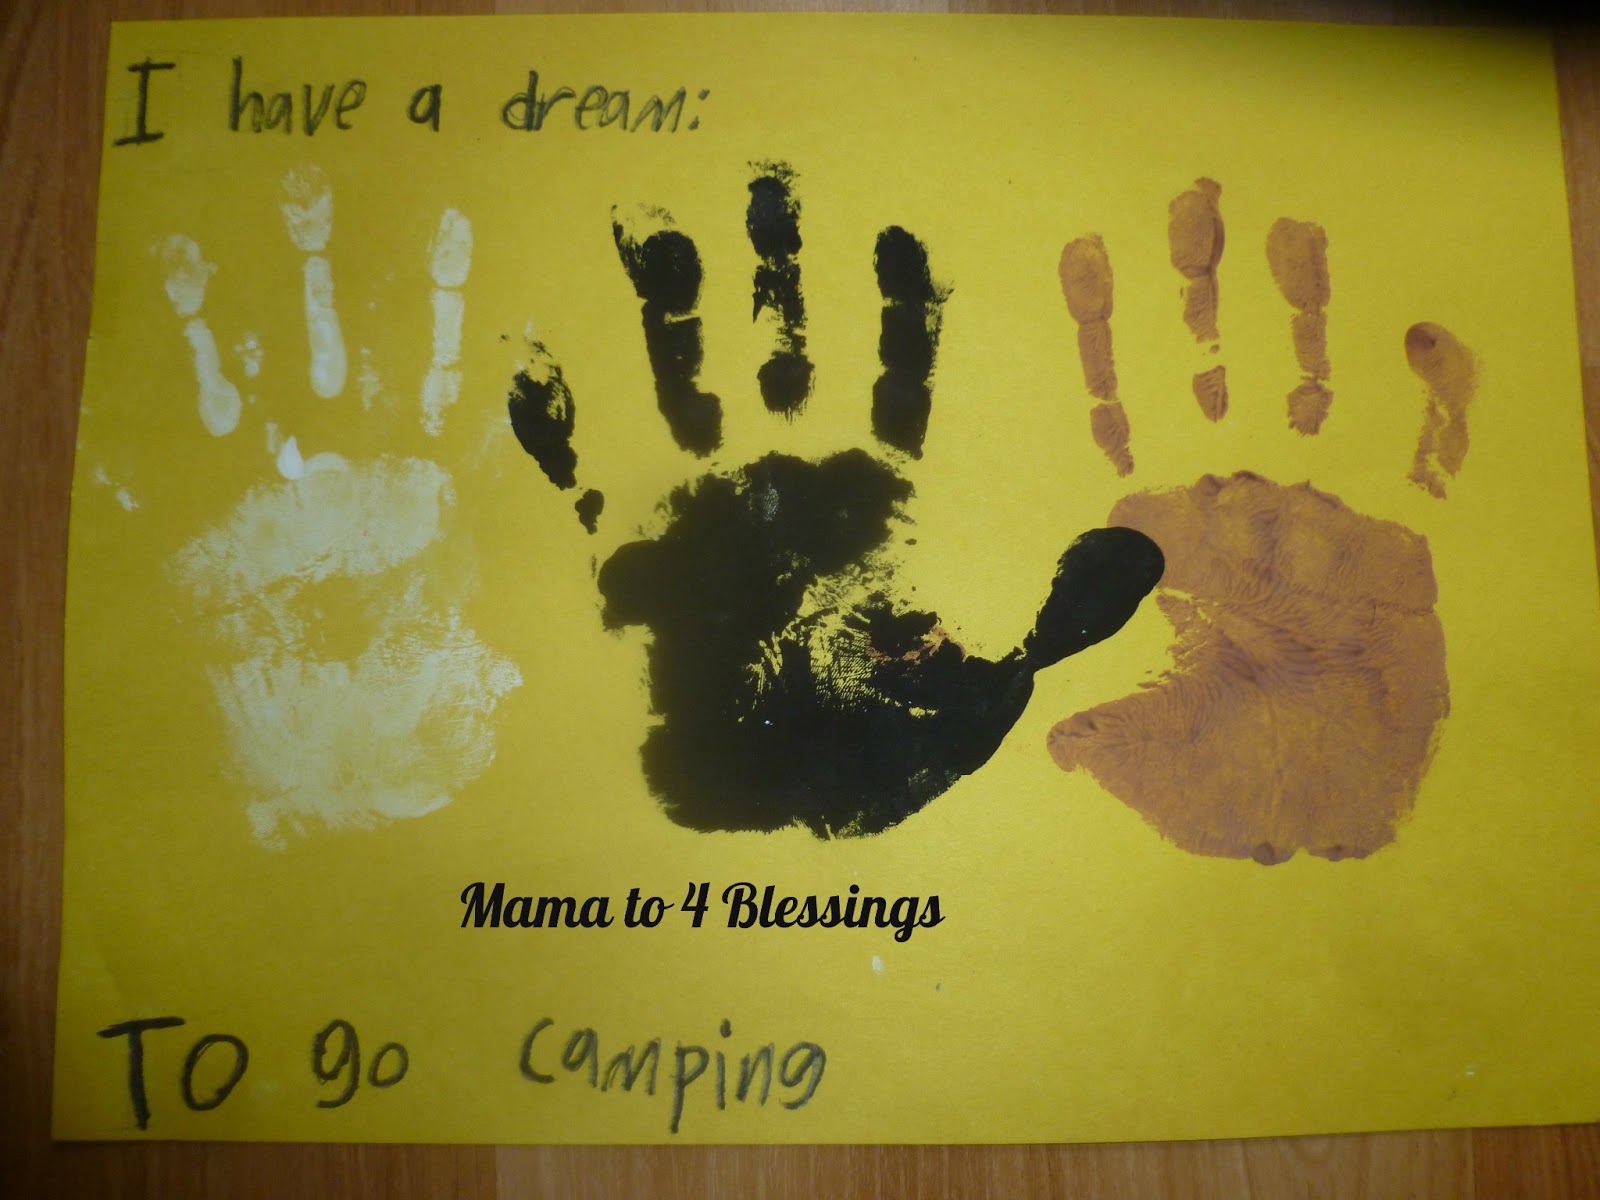 MARTIN LUTHER KING JR. LAPBOOK & CRAFT - Mama to 6 Blessings1600 x 1200